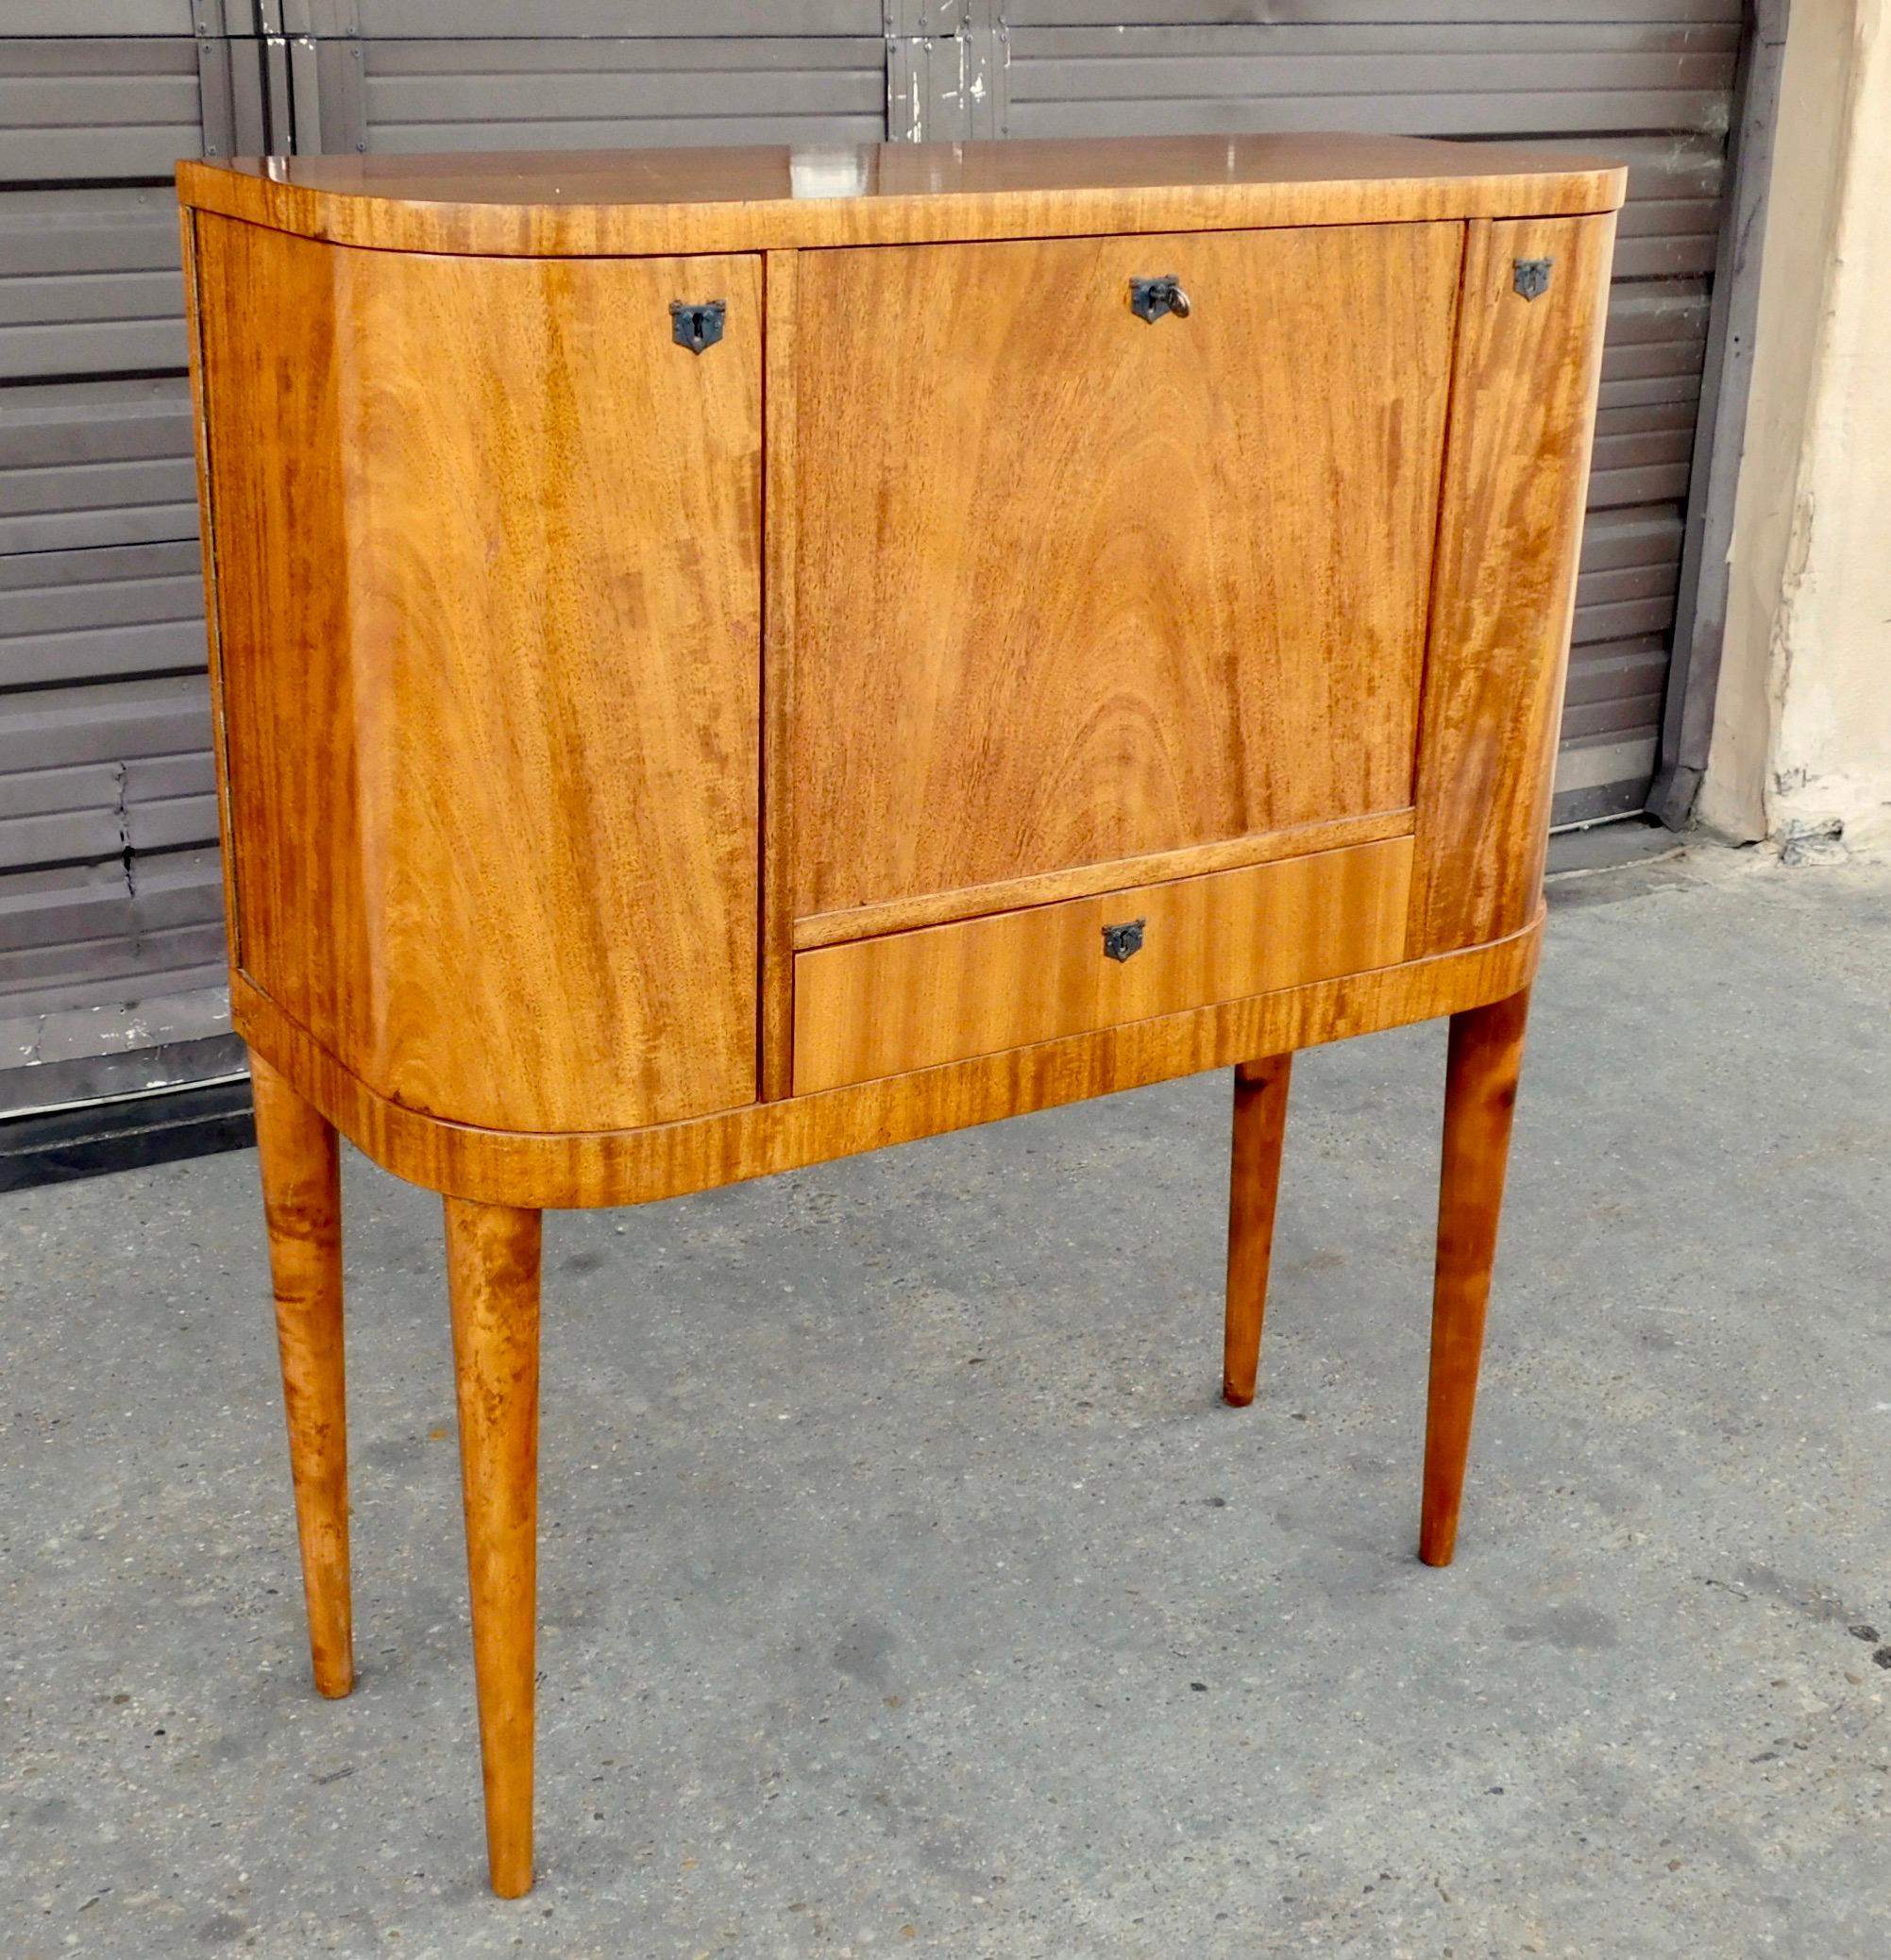 Swedish Art Moderne drop front secretary desk with side cabinets for bottle storage.
Rendered in open grain, natural color Honduran mahogany.
With interior drawers and desk flap which is stabile and great for supporting (and storing) a lap top